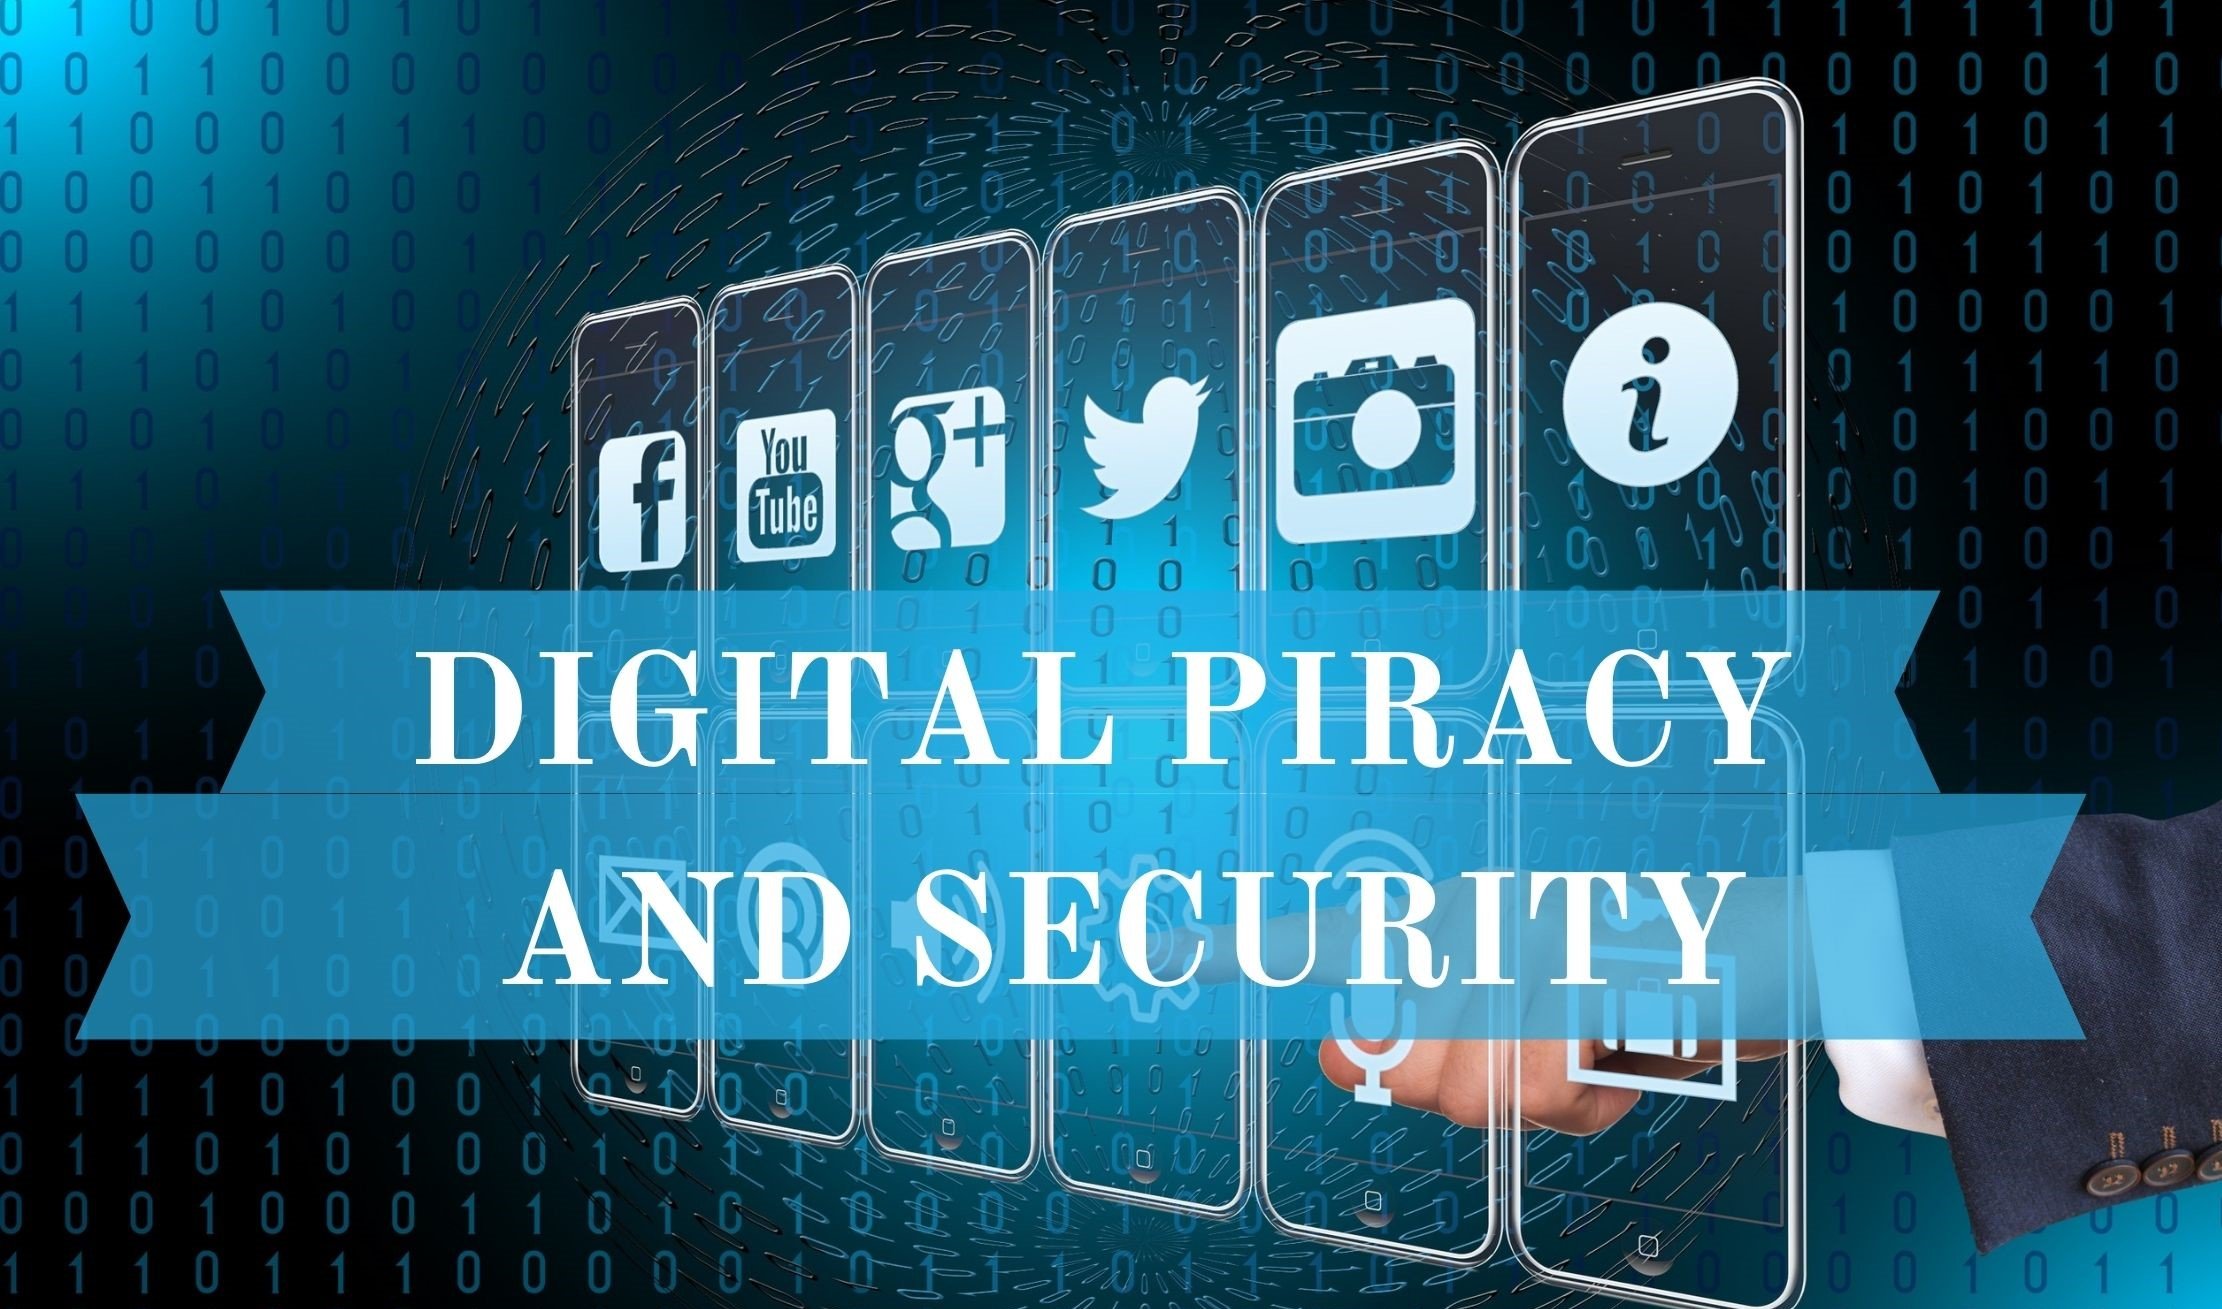 DIGITAL PIRACY AND SECURITY